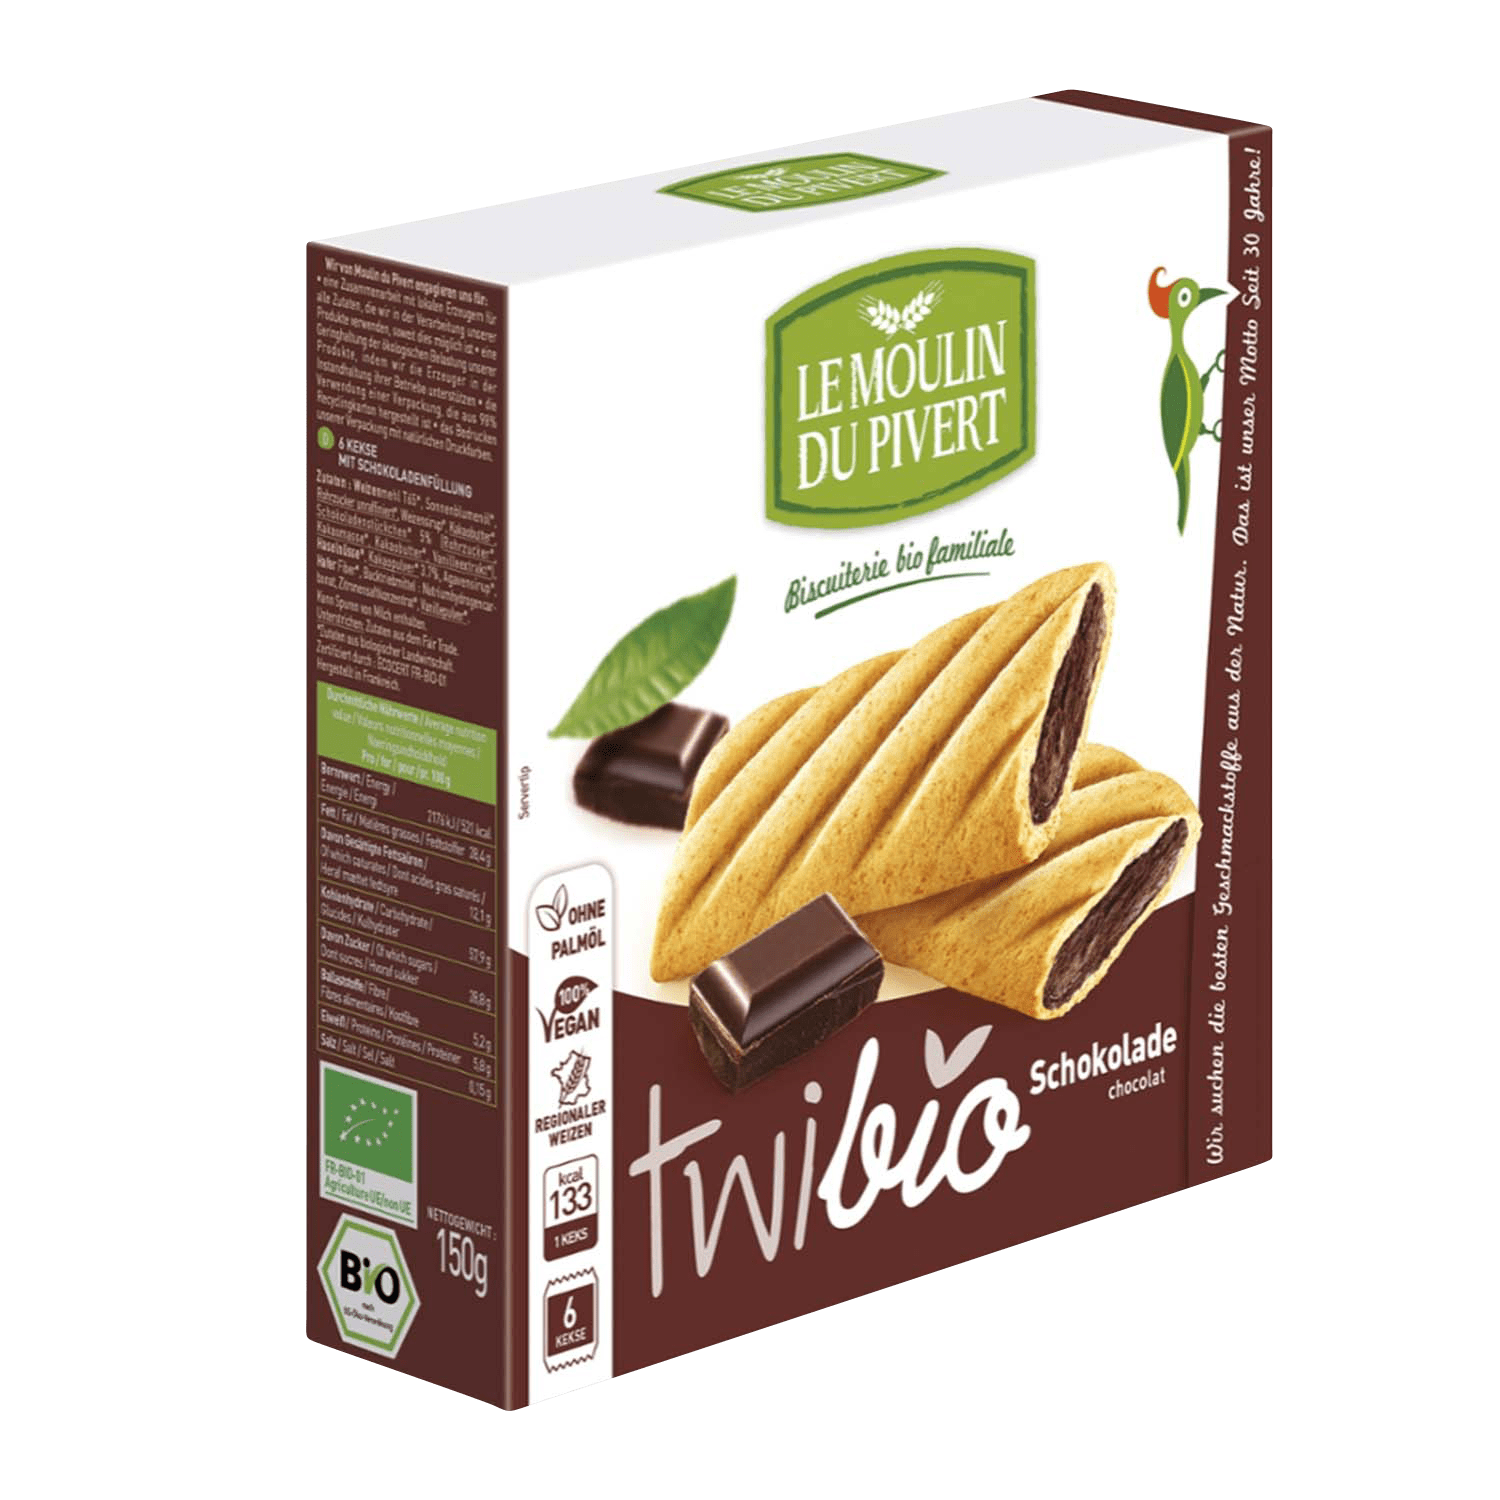 Twibio Biscuits With Chocolate Filling, Organic, 150g